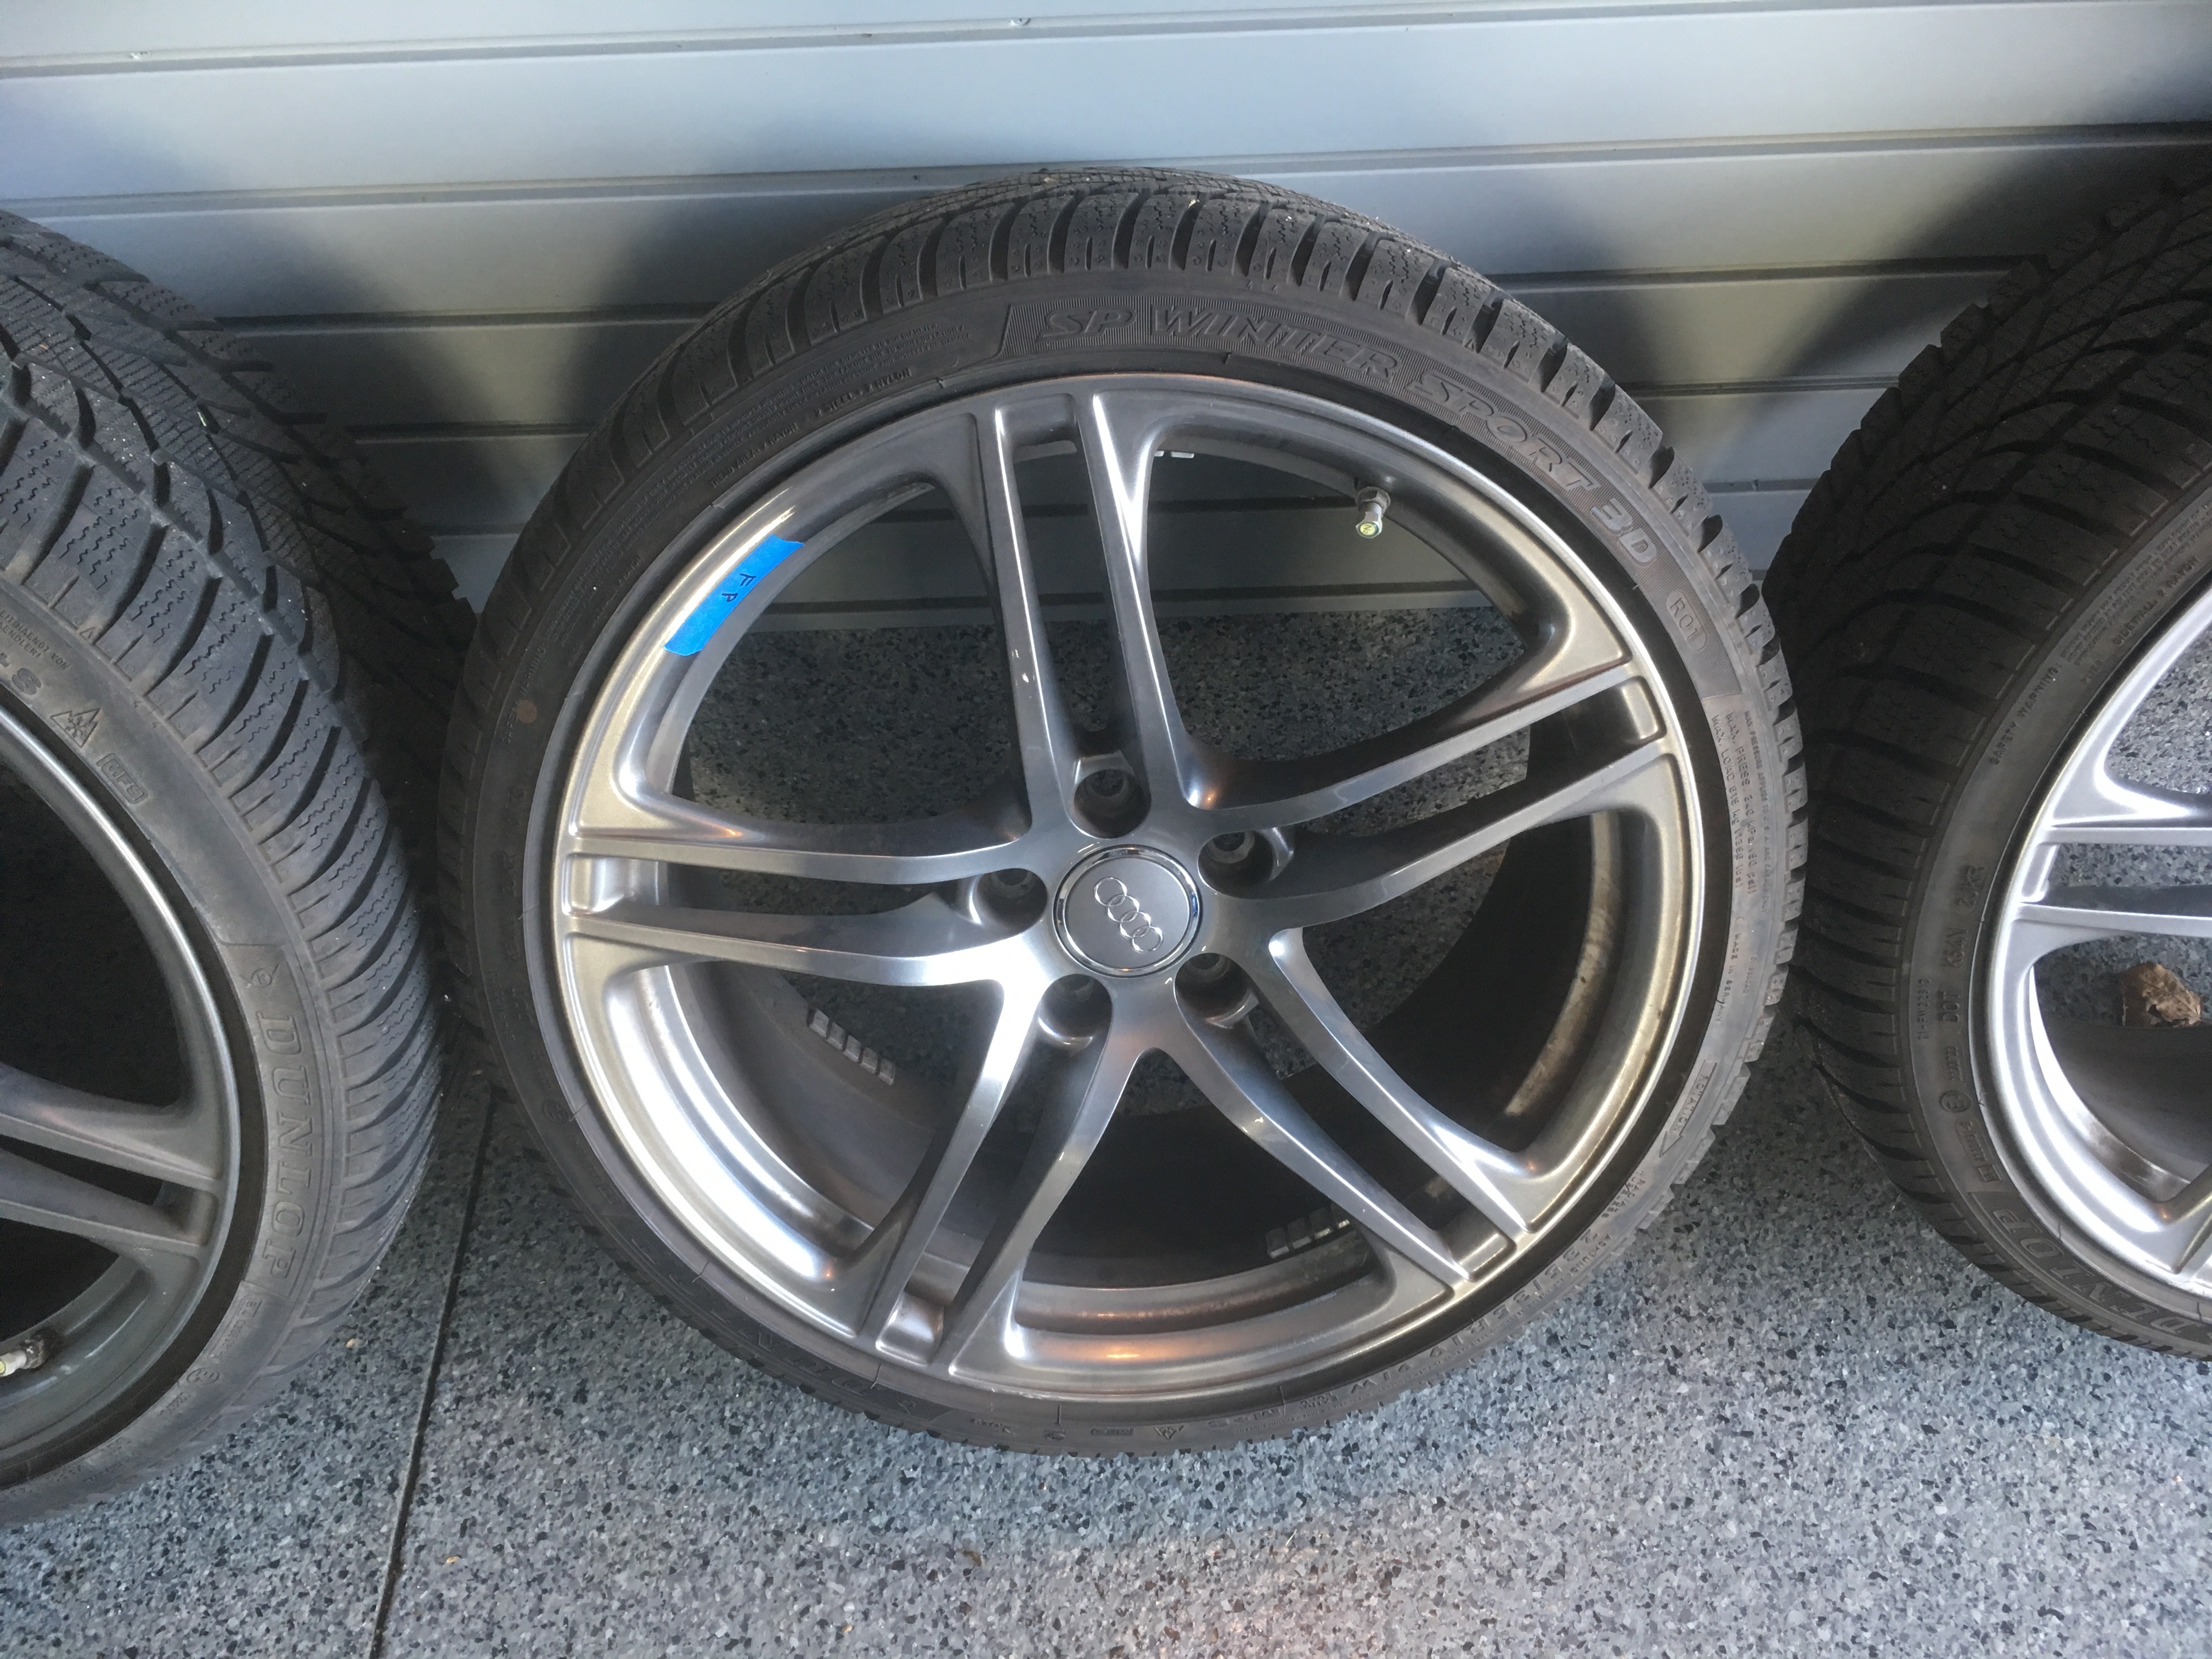 Audi R8 Winter wheels and tires for R8 Gen 1 near Toronto ...